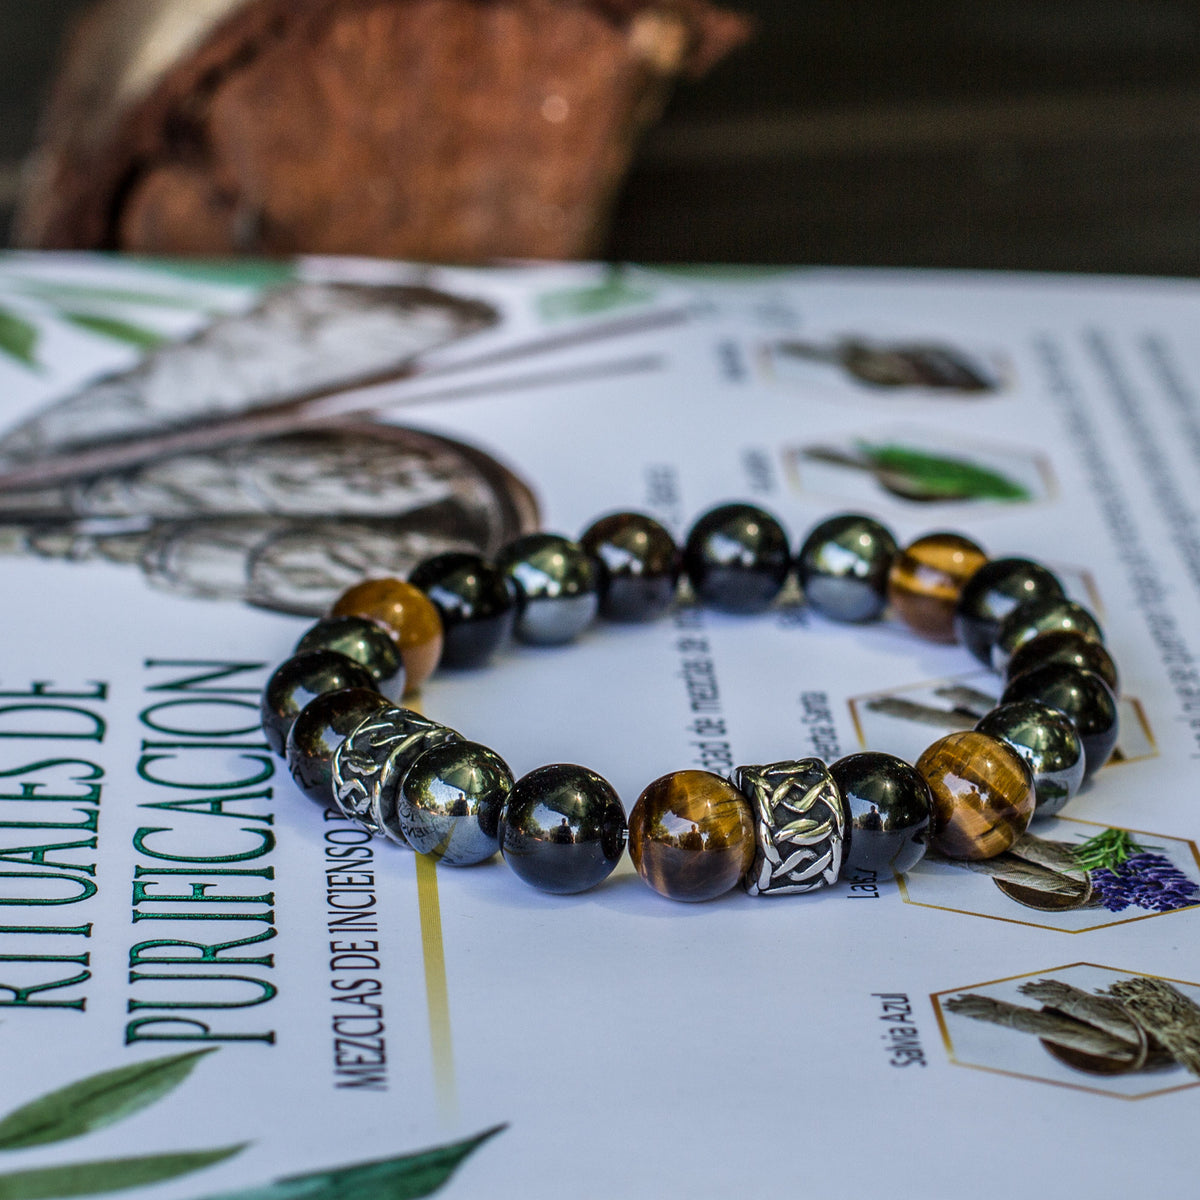 The Triple Protection bracelet 10mm - 3 of the most powerful crystals combined to create perfection. The Triple Protection Bracelet is one of our most sought after bracelets, boasting some of the most incredible gems around. Tiger’s eye, black Obsidian and Hematite is the powerhouse of beads when combined into one.